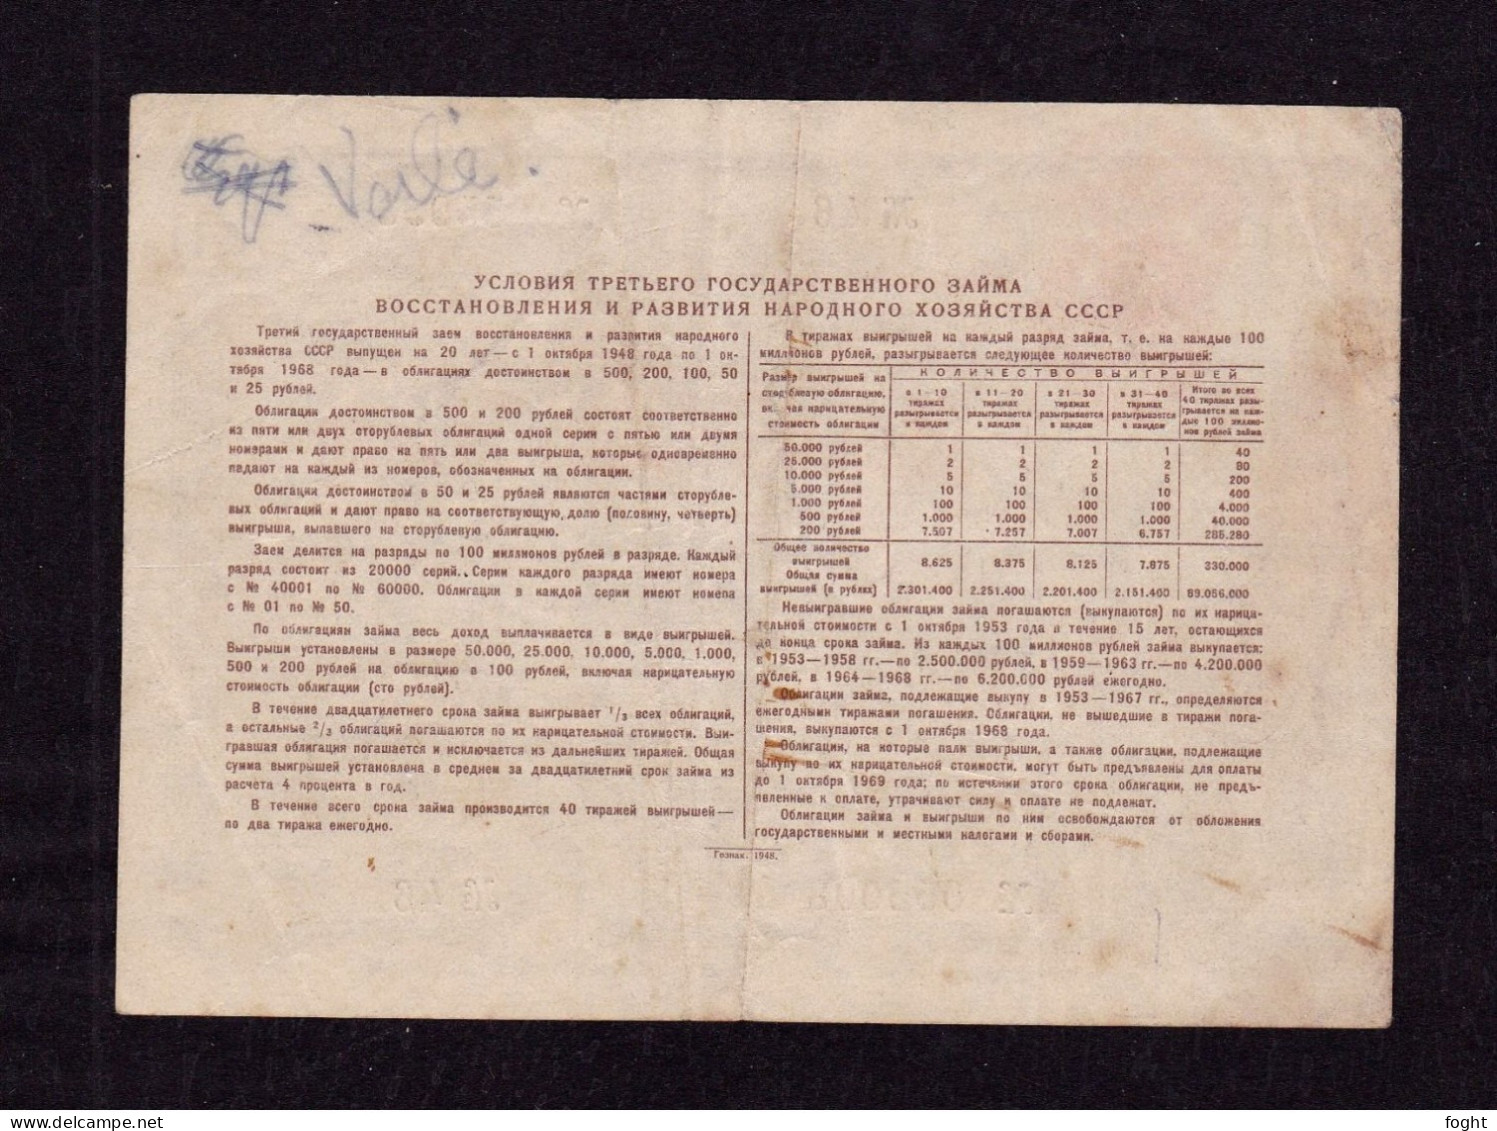 1948 Russia 25 Roubles State Loan Bond - Rusland